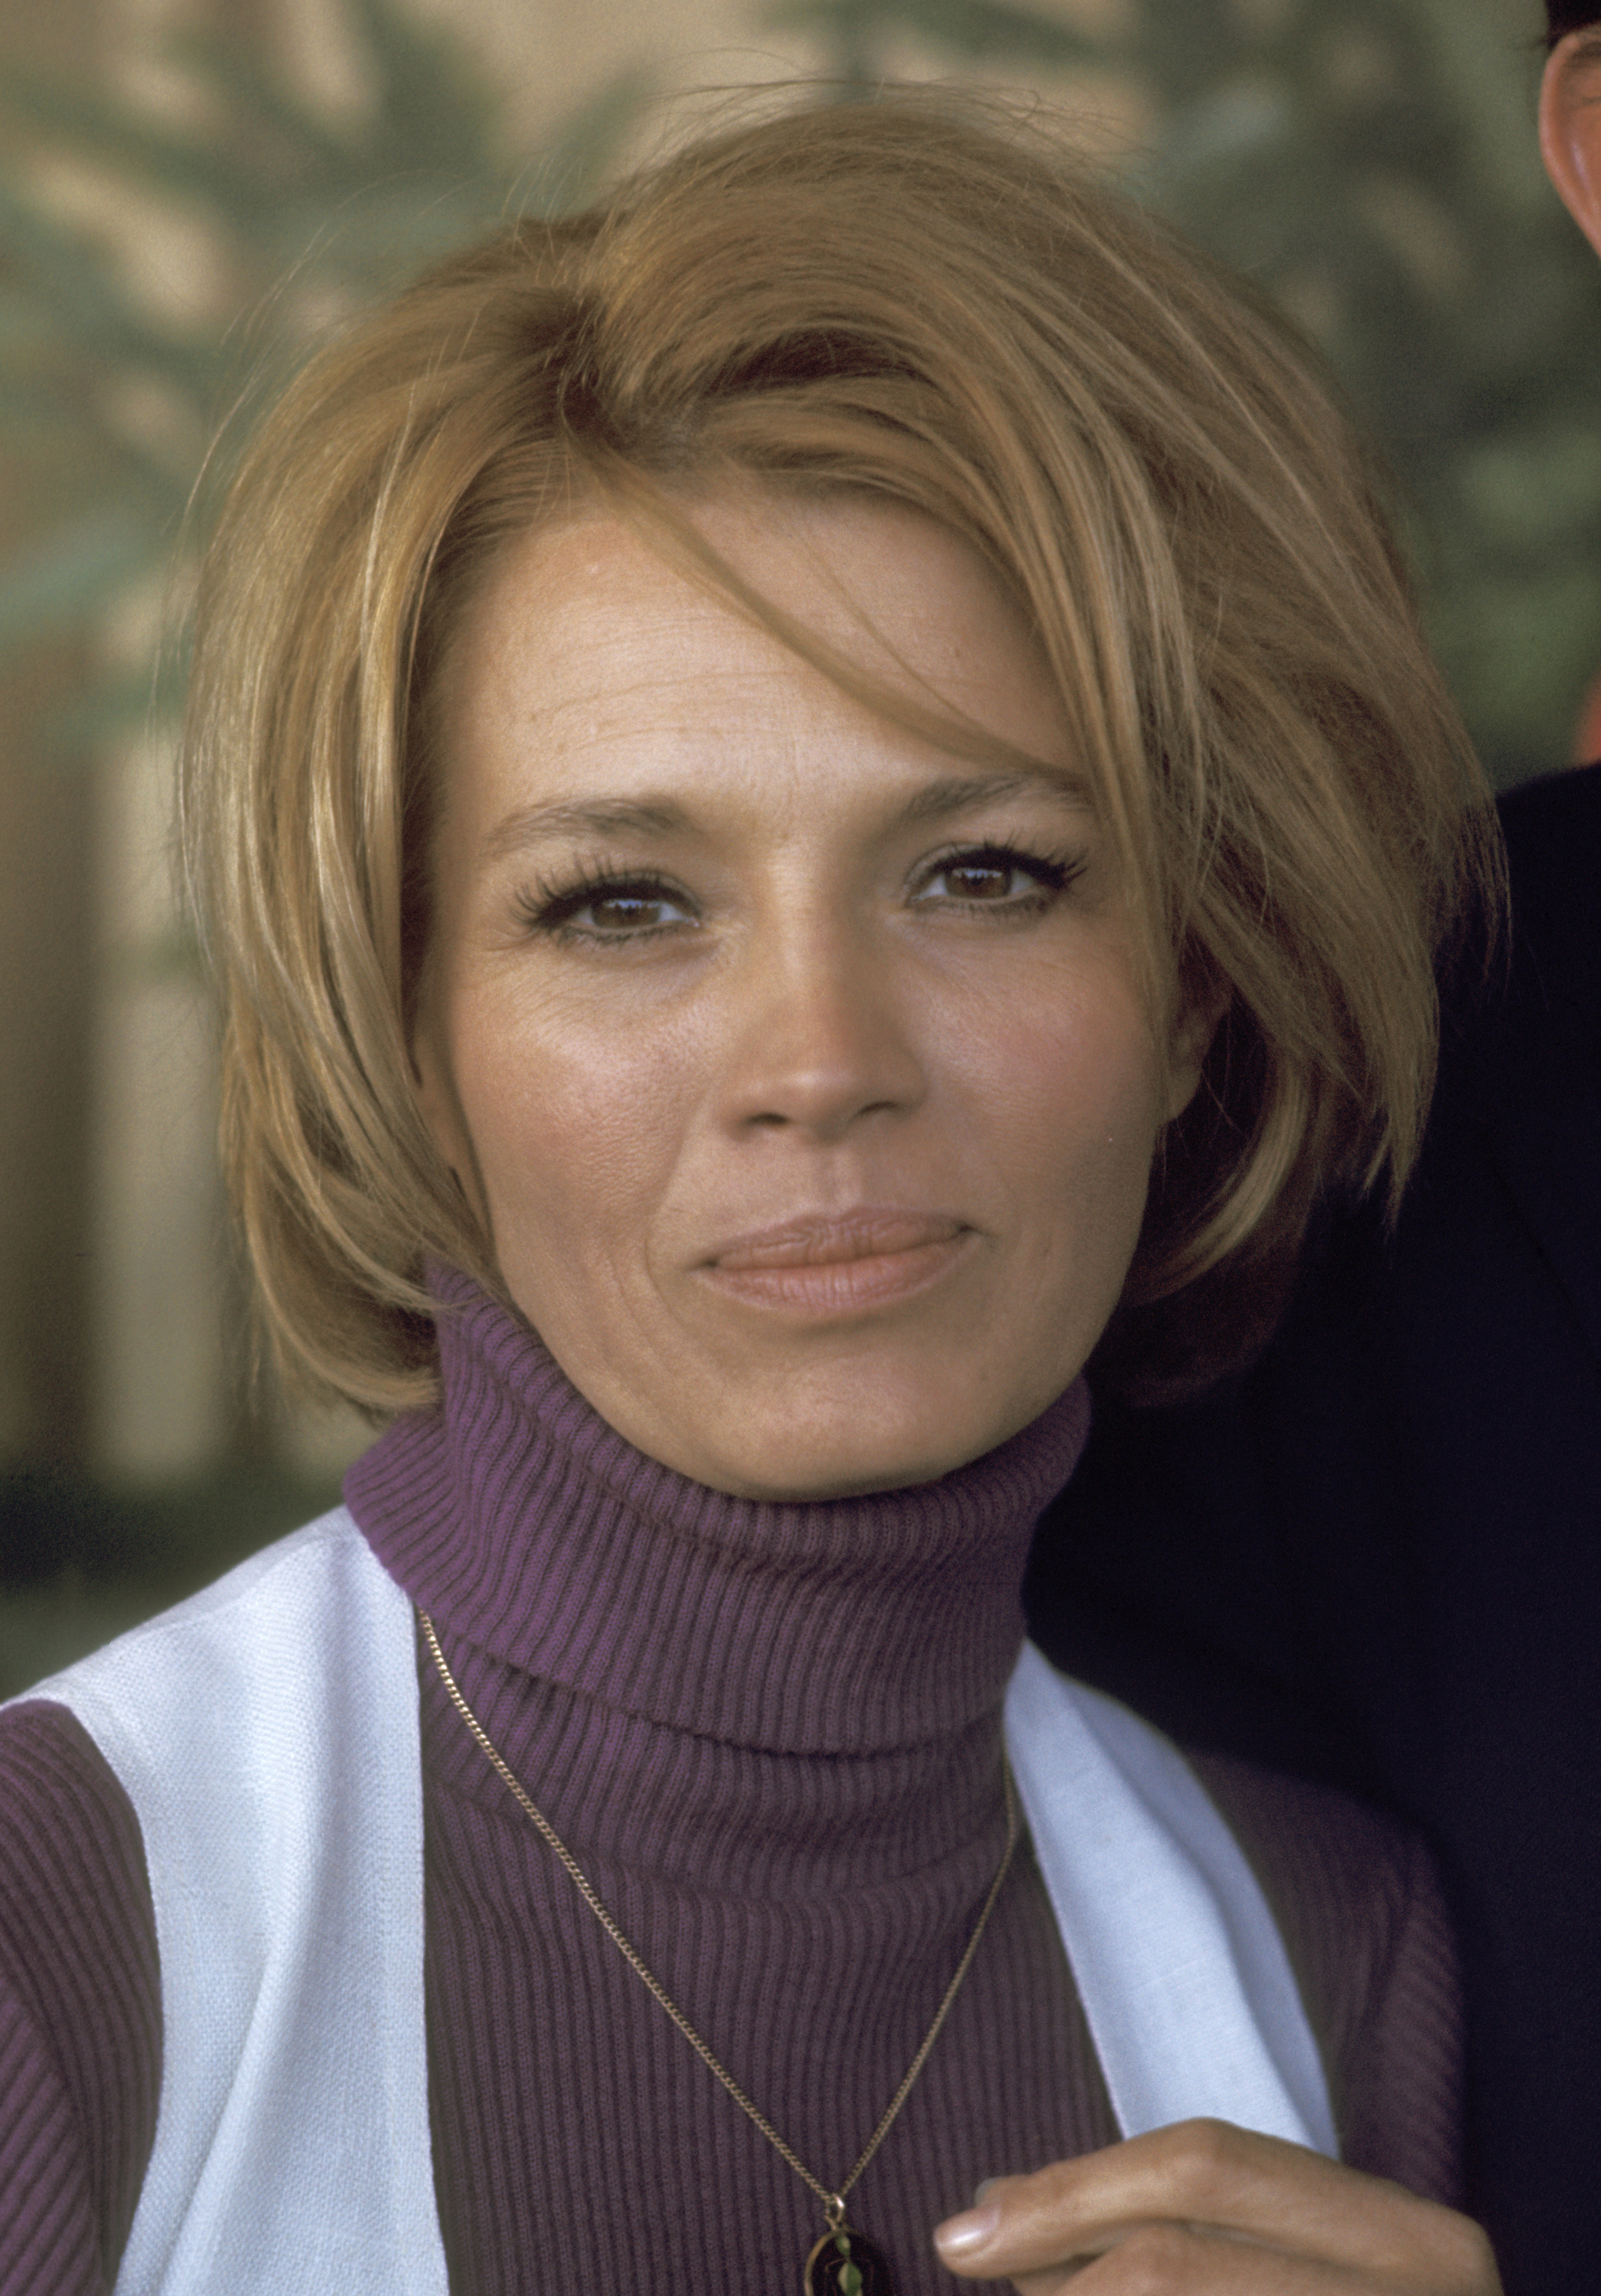 Actress Angie Dickinson during the National Leisure Inc. Benefit at Lion Country Safari on April 24, 1971 in Laguana Hills, California | Source: Getty Images